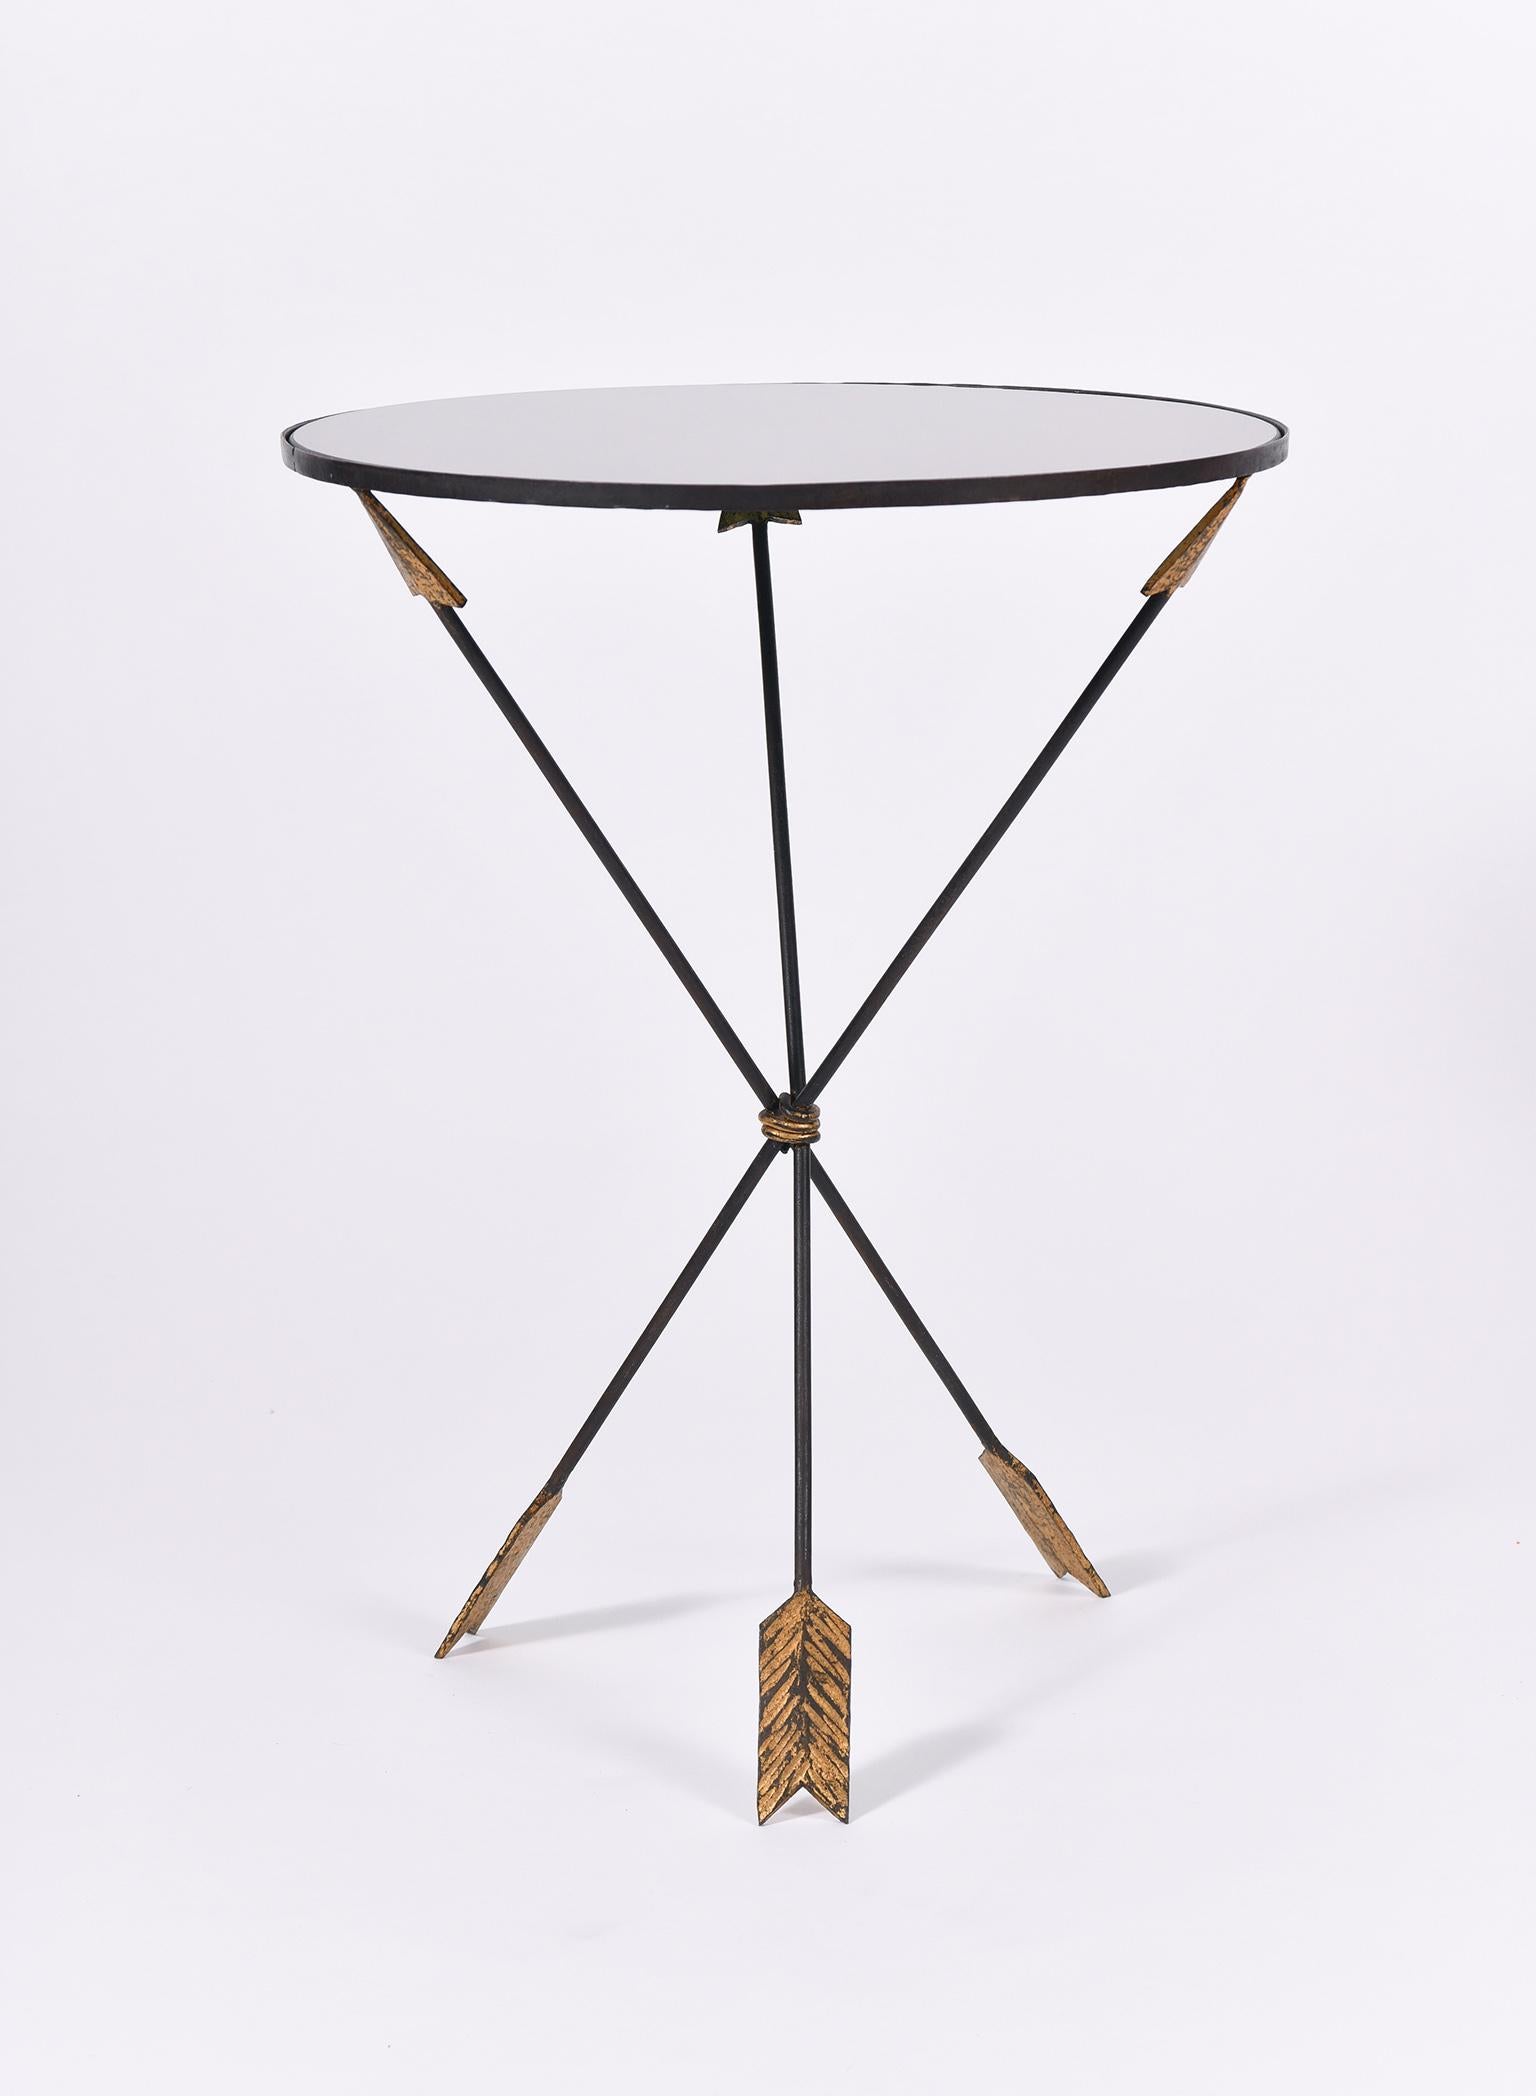 A gilt and black enameled iron occasional table, the arrow shaped tripod supporting a smoked mirror glass circular top
France, circa 1950.